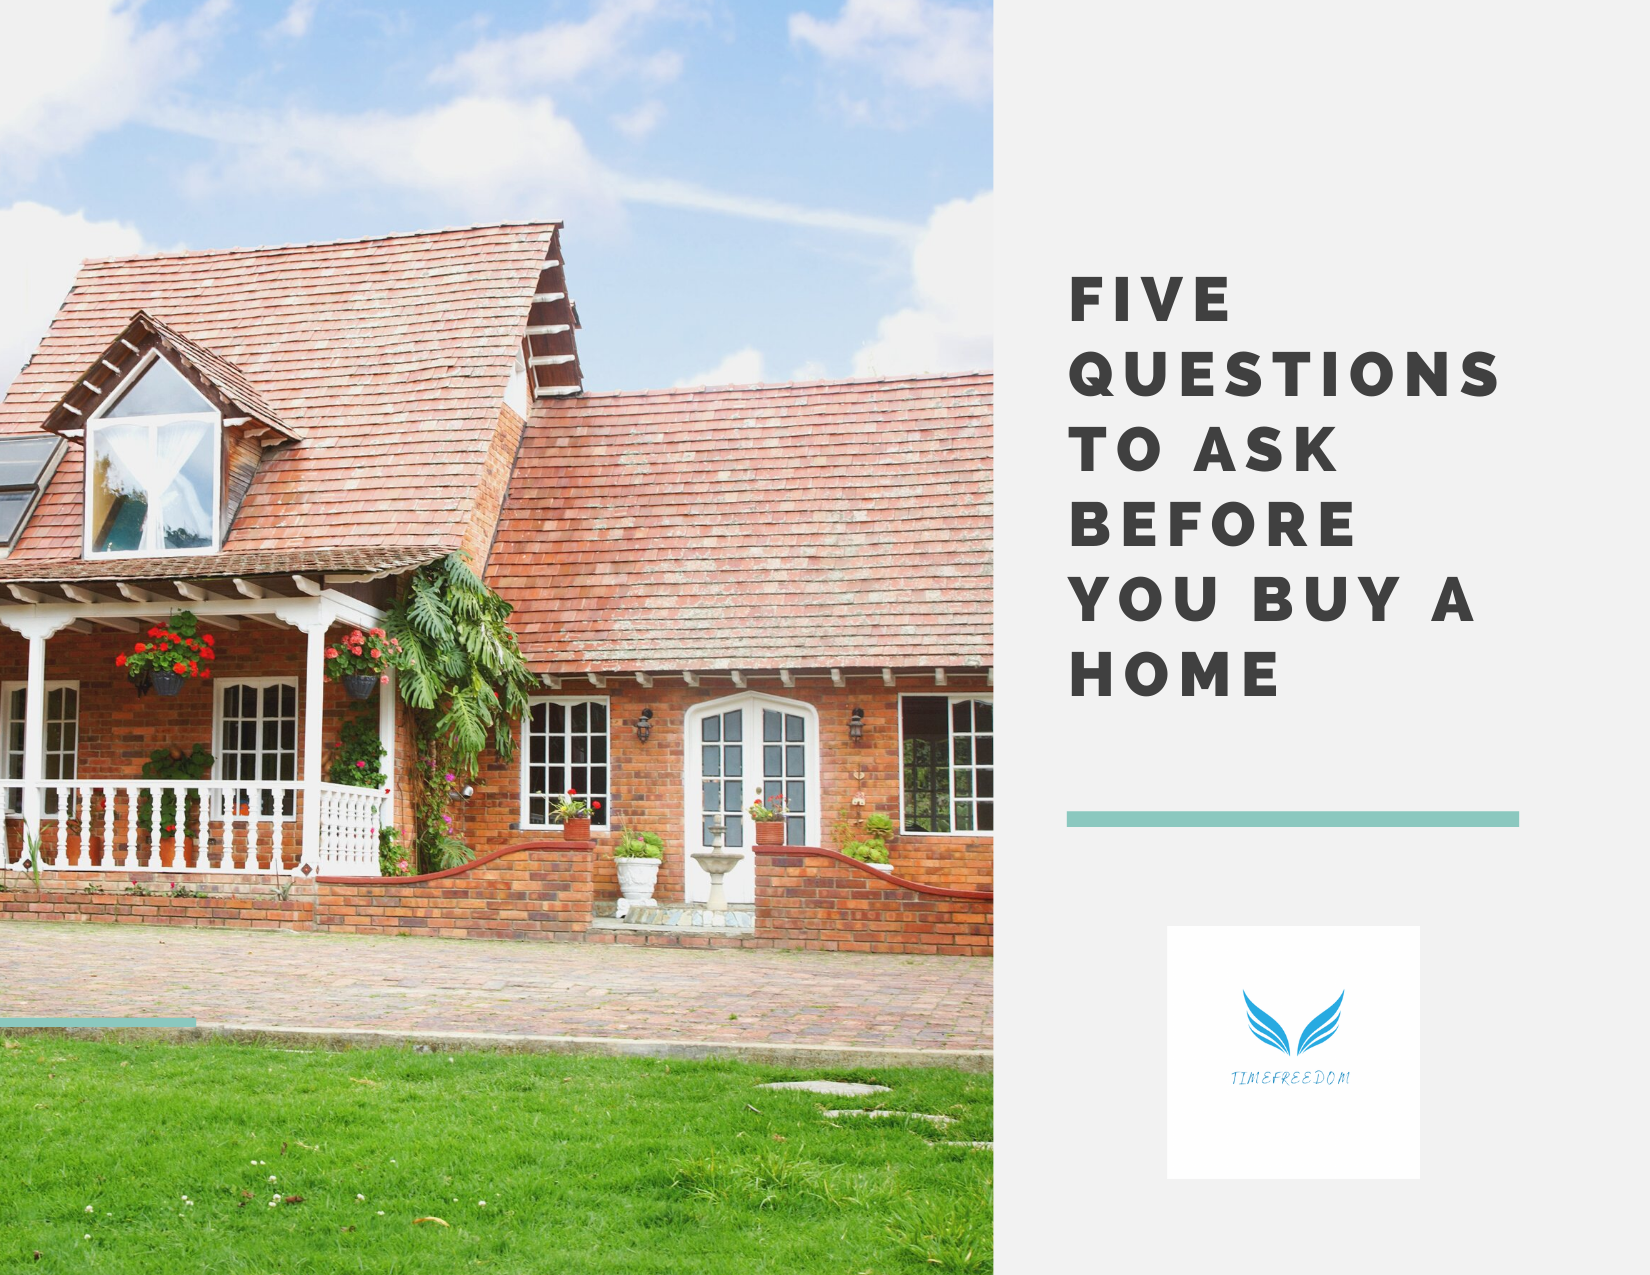 5 Questions to Ask Before You Buy a Home